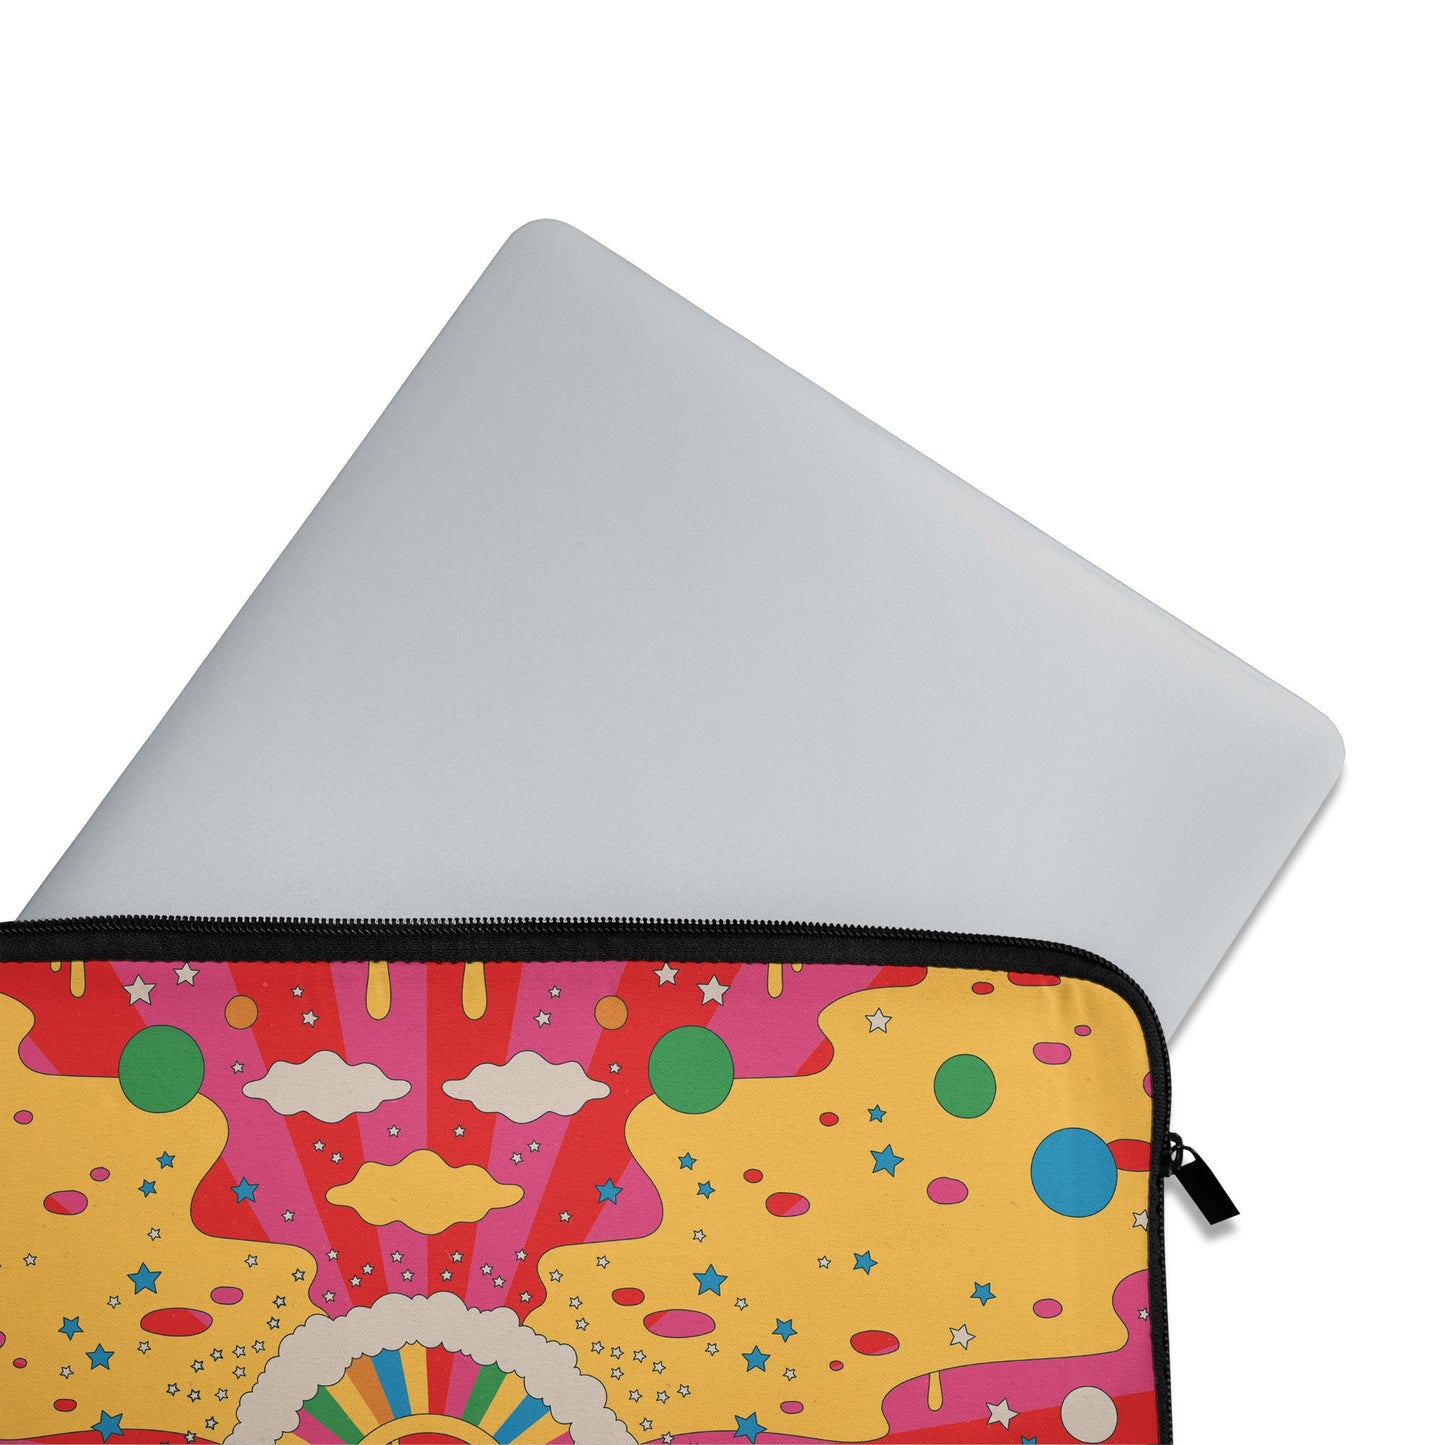 Psychedelic Grooby Laptop Sleeve